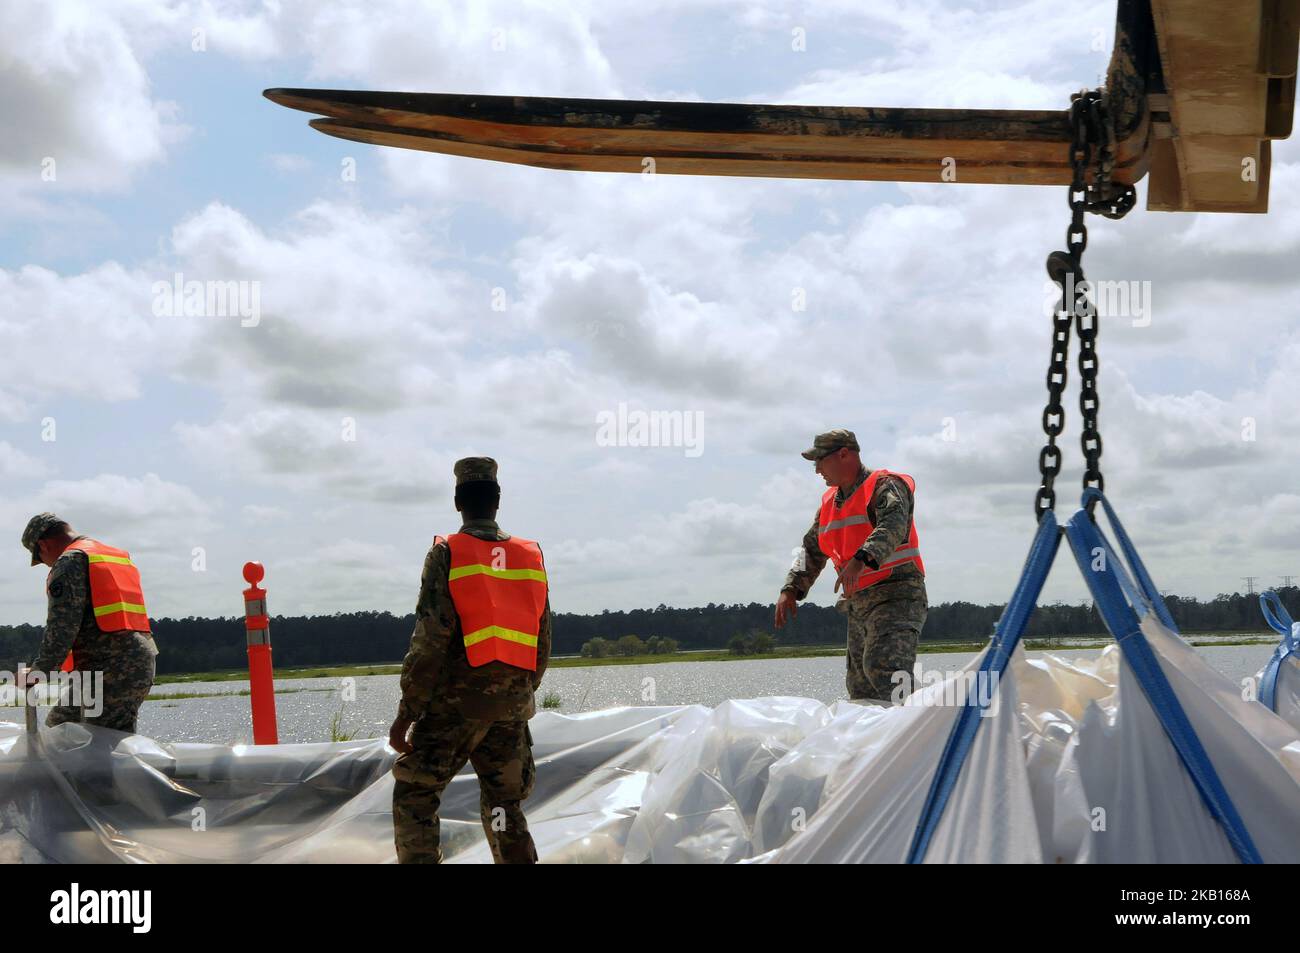 Conway, South Carolina, United States - Members of the South Carolina National Guard build a sandbag barrier on highway 501 along Lake Busbee in Conway, South Carolina on September 17, 2018, after the passing of Hurricane Florence. The City of Conway halted its previous efforts to stop the construction of the sandbag dam after being assured by state and county officials on September 17 the barrier would not cause additional flooding into Conway. (Photo by Paul Hennessy/NurPhoto) Stock Photo